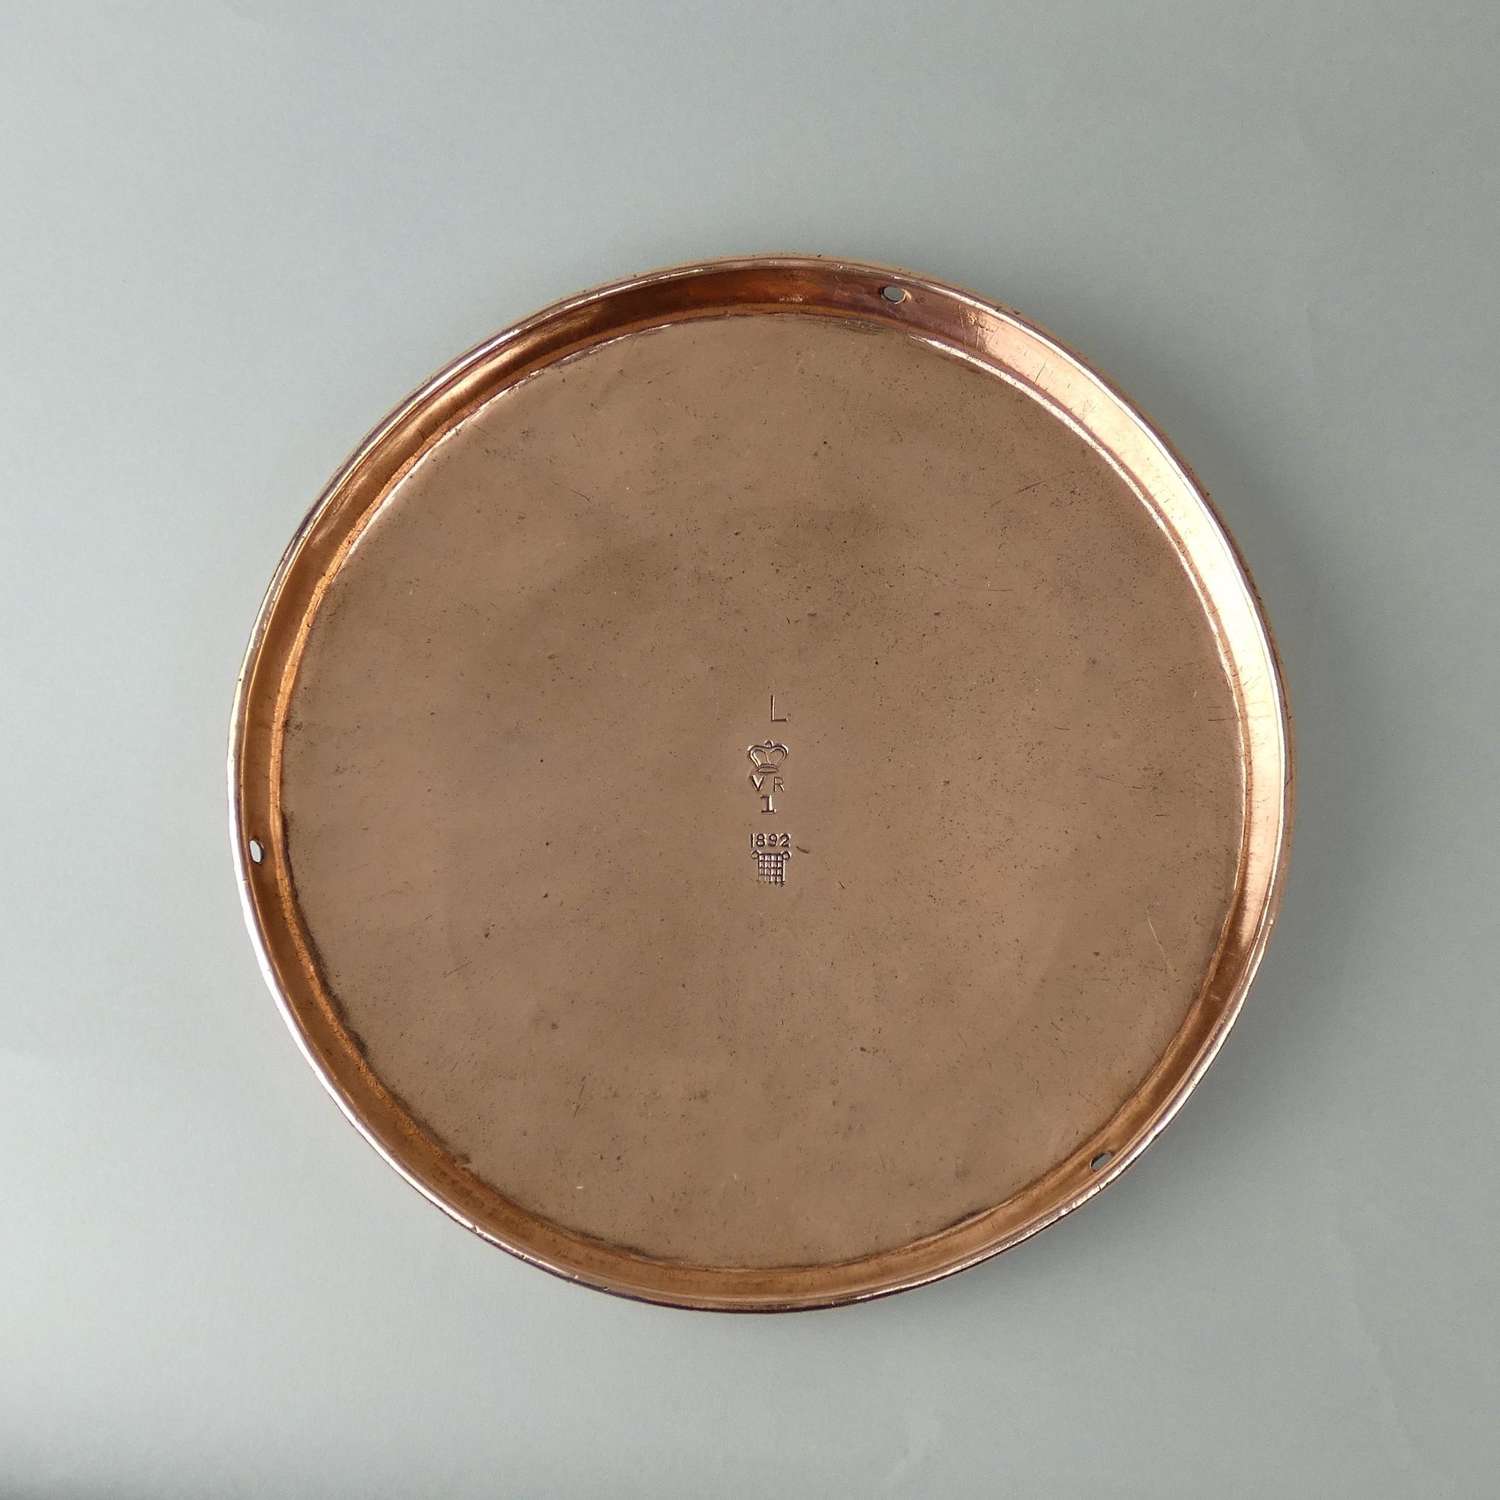 Copper scale pan with VR assay mark